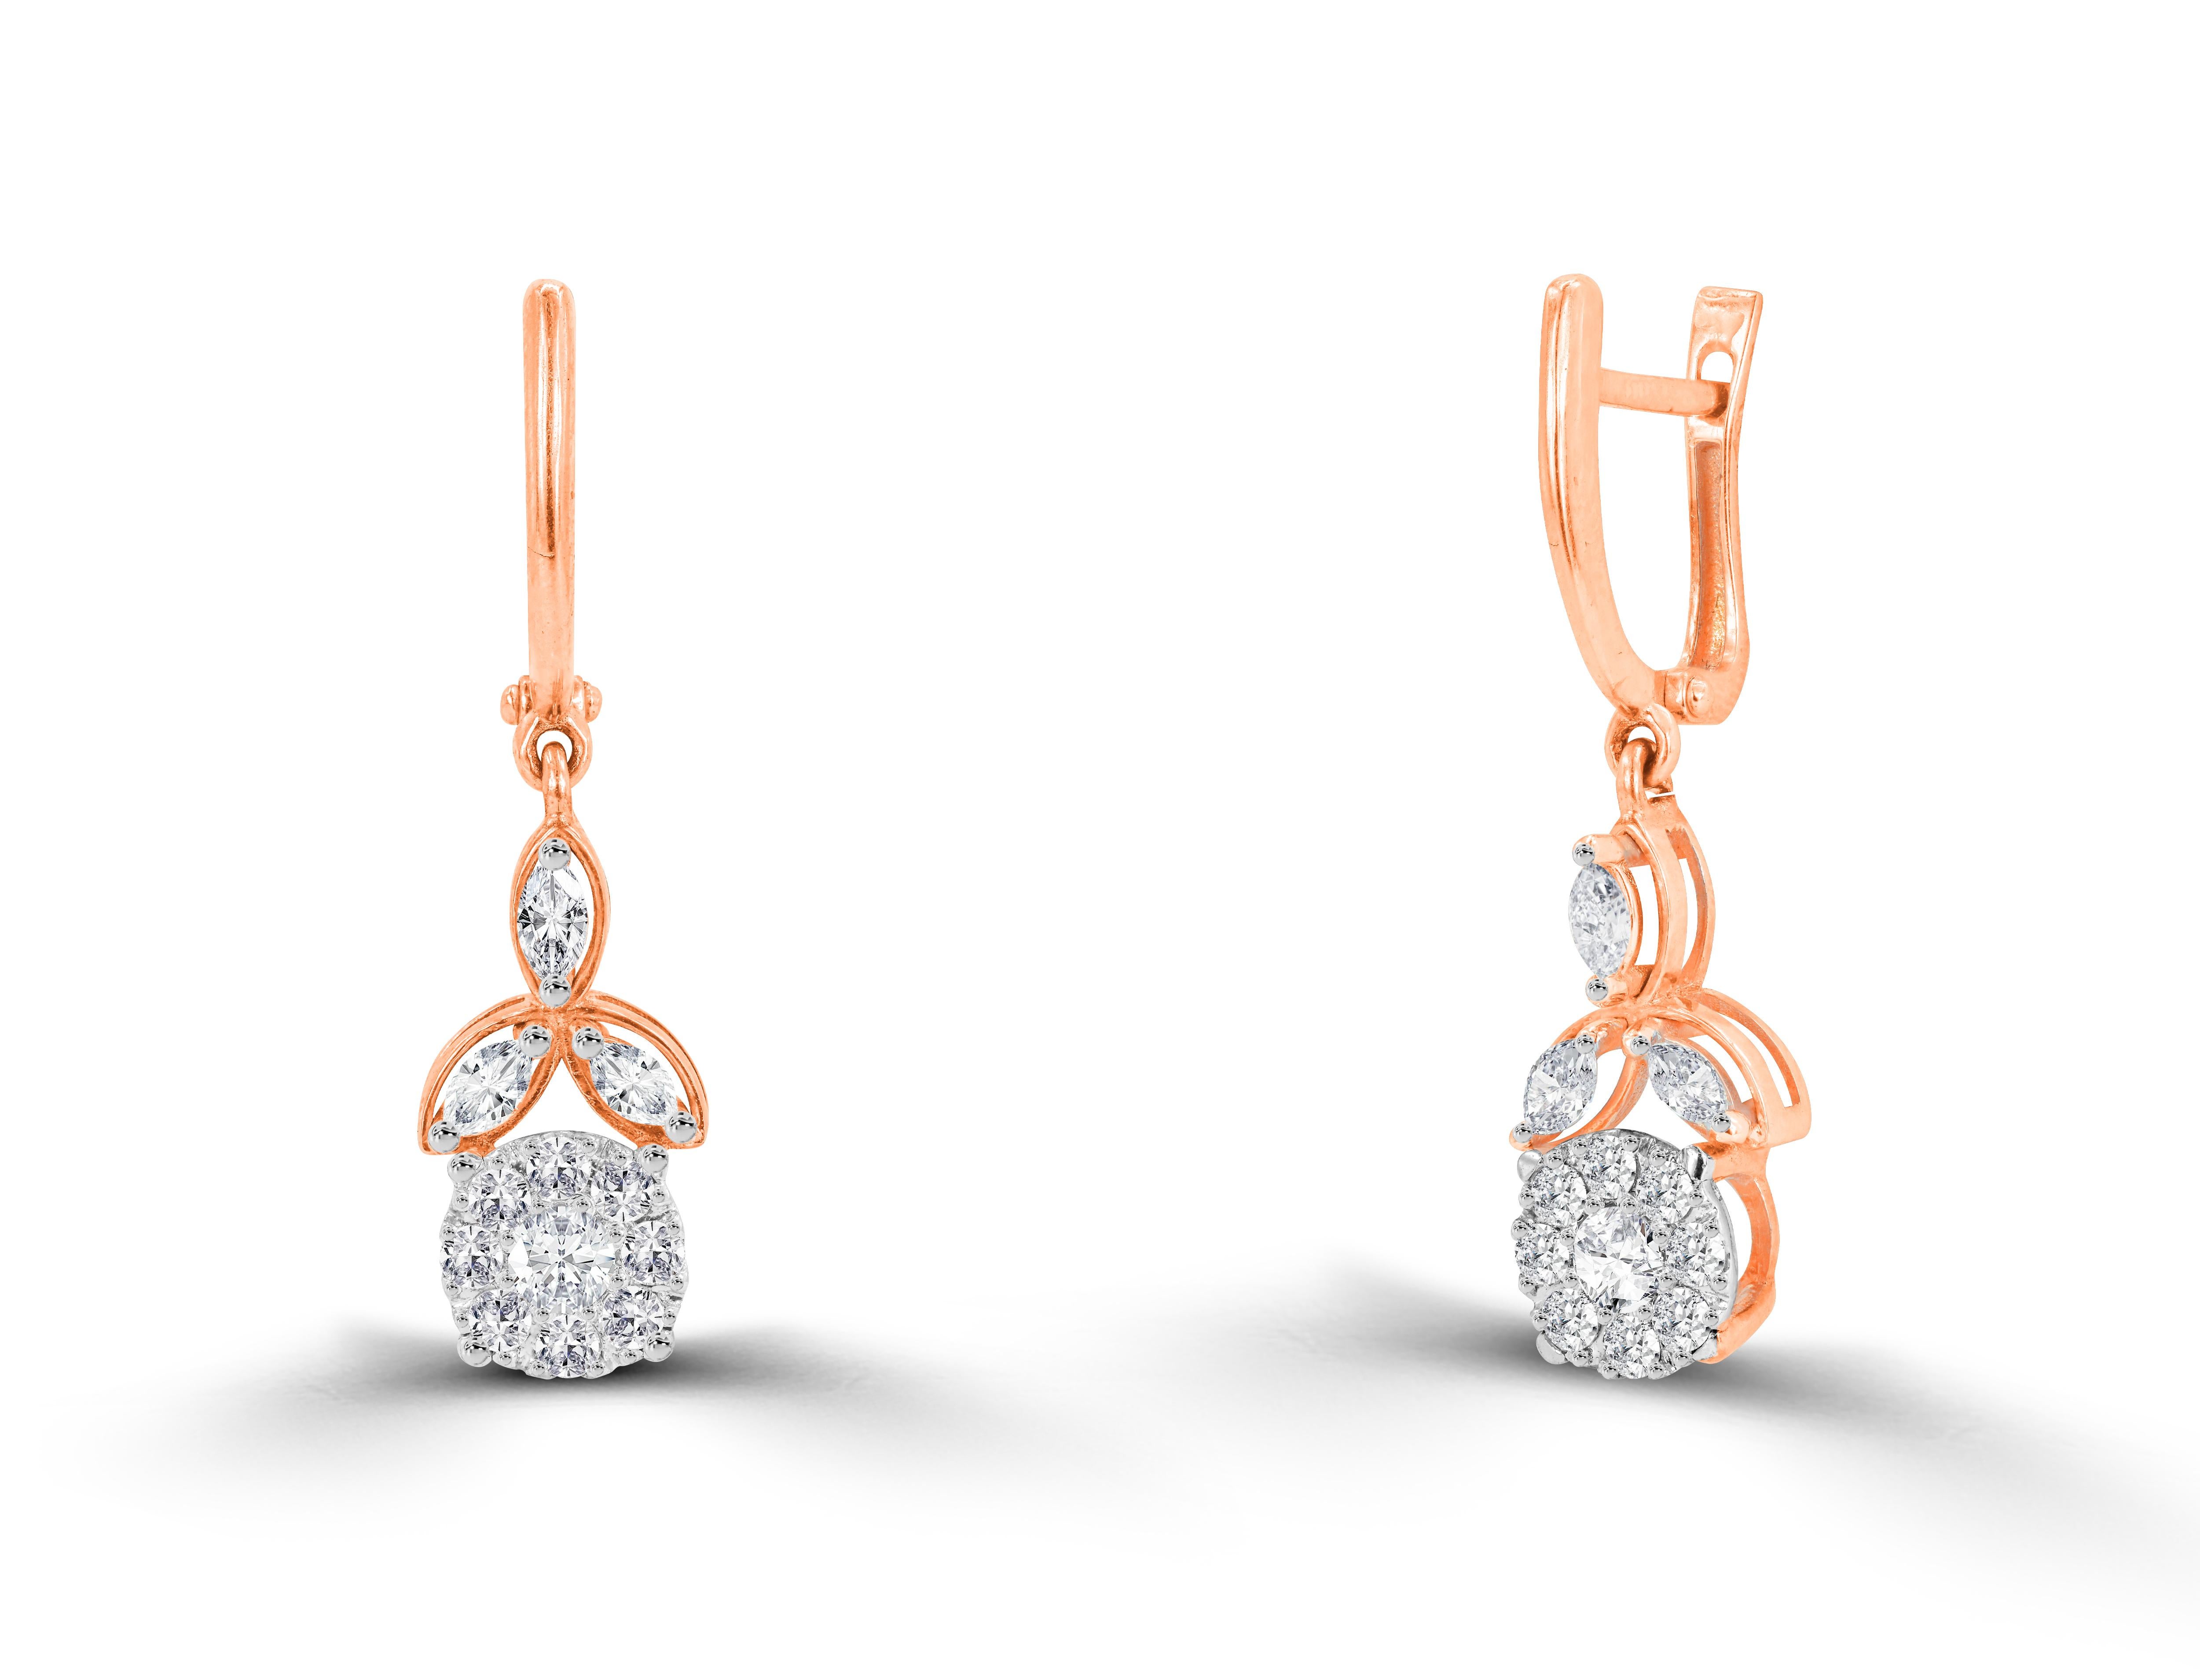 0.92 Ct Diamond Solitaire and leaf Drop Earrings in 18K Gold, Round Brilliant cut diamond earrings, Natural Diamond Earrings, Lever-Back Earrings, Heavy End Earrings.

Oshi Jewels presents to you a beautiful Earring collection with natural diamonds